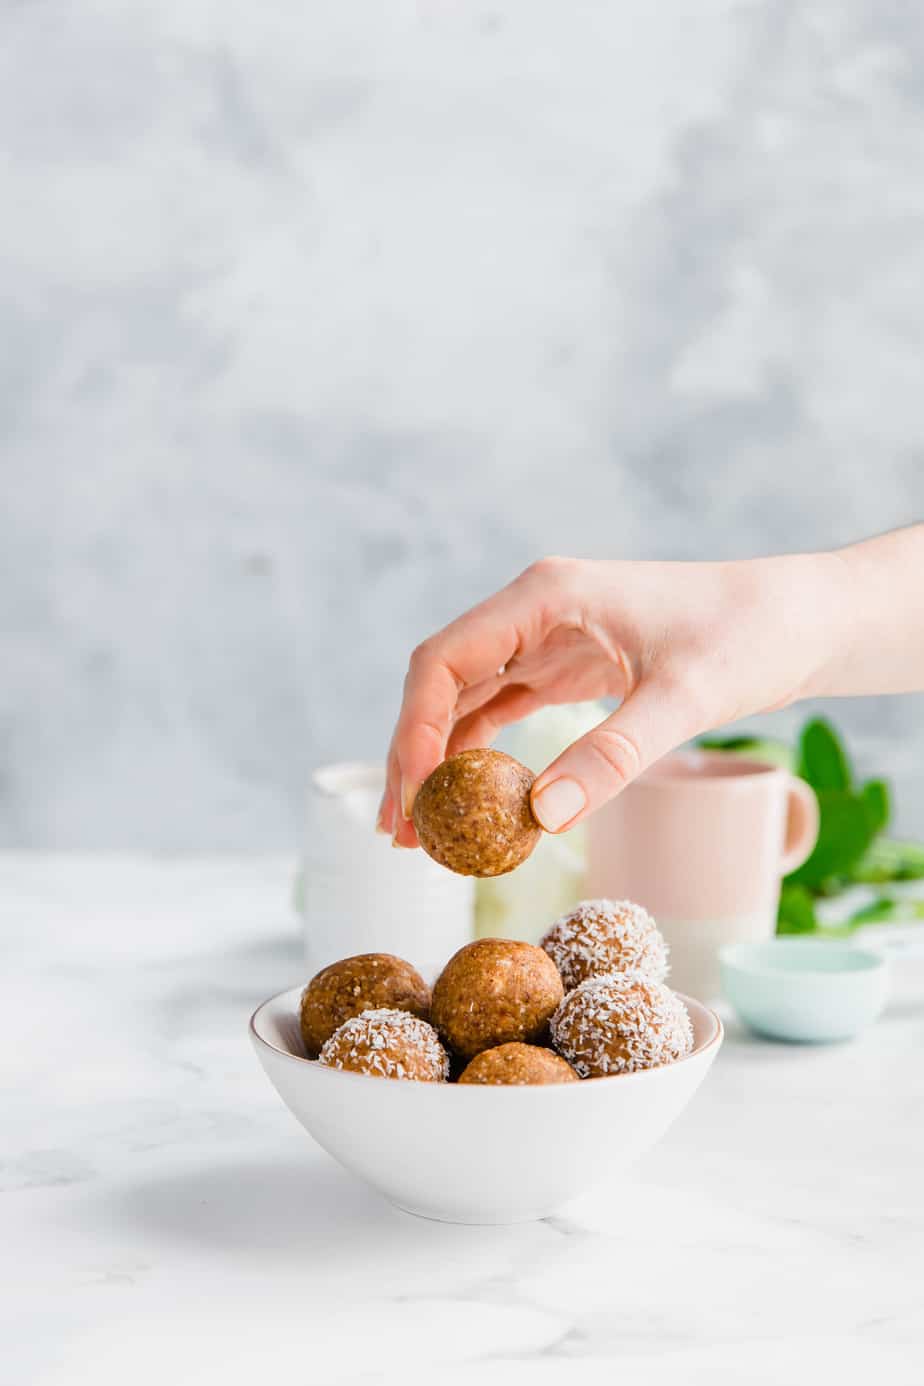 A bowl of energy balls with a hand reaching for one.